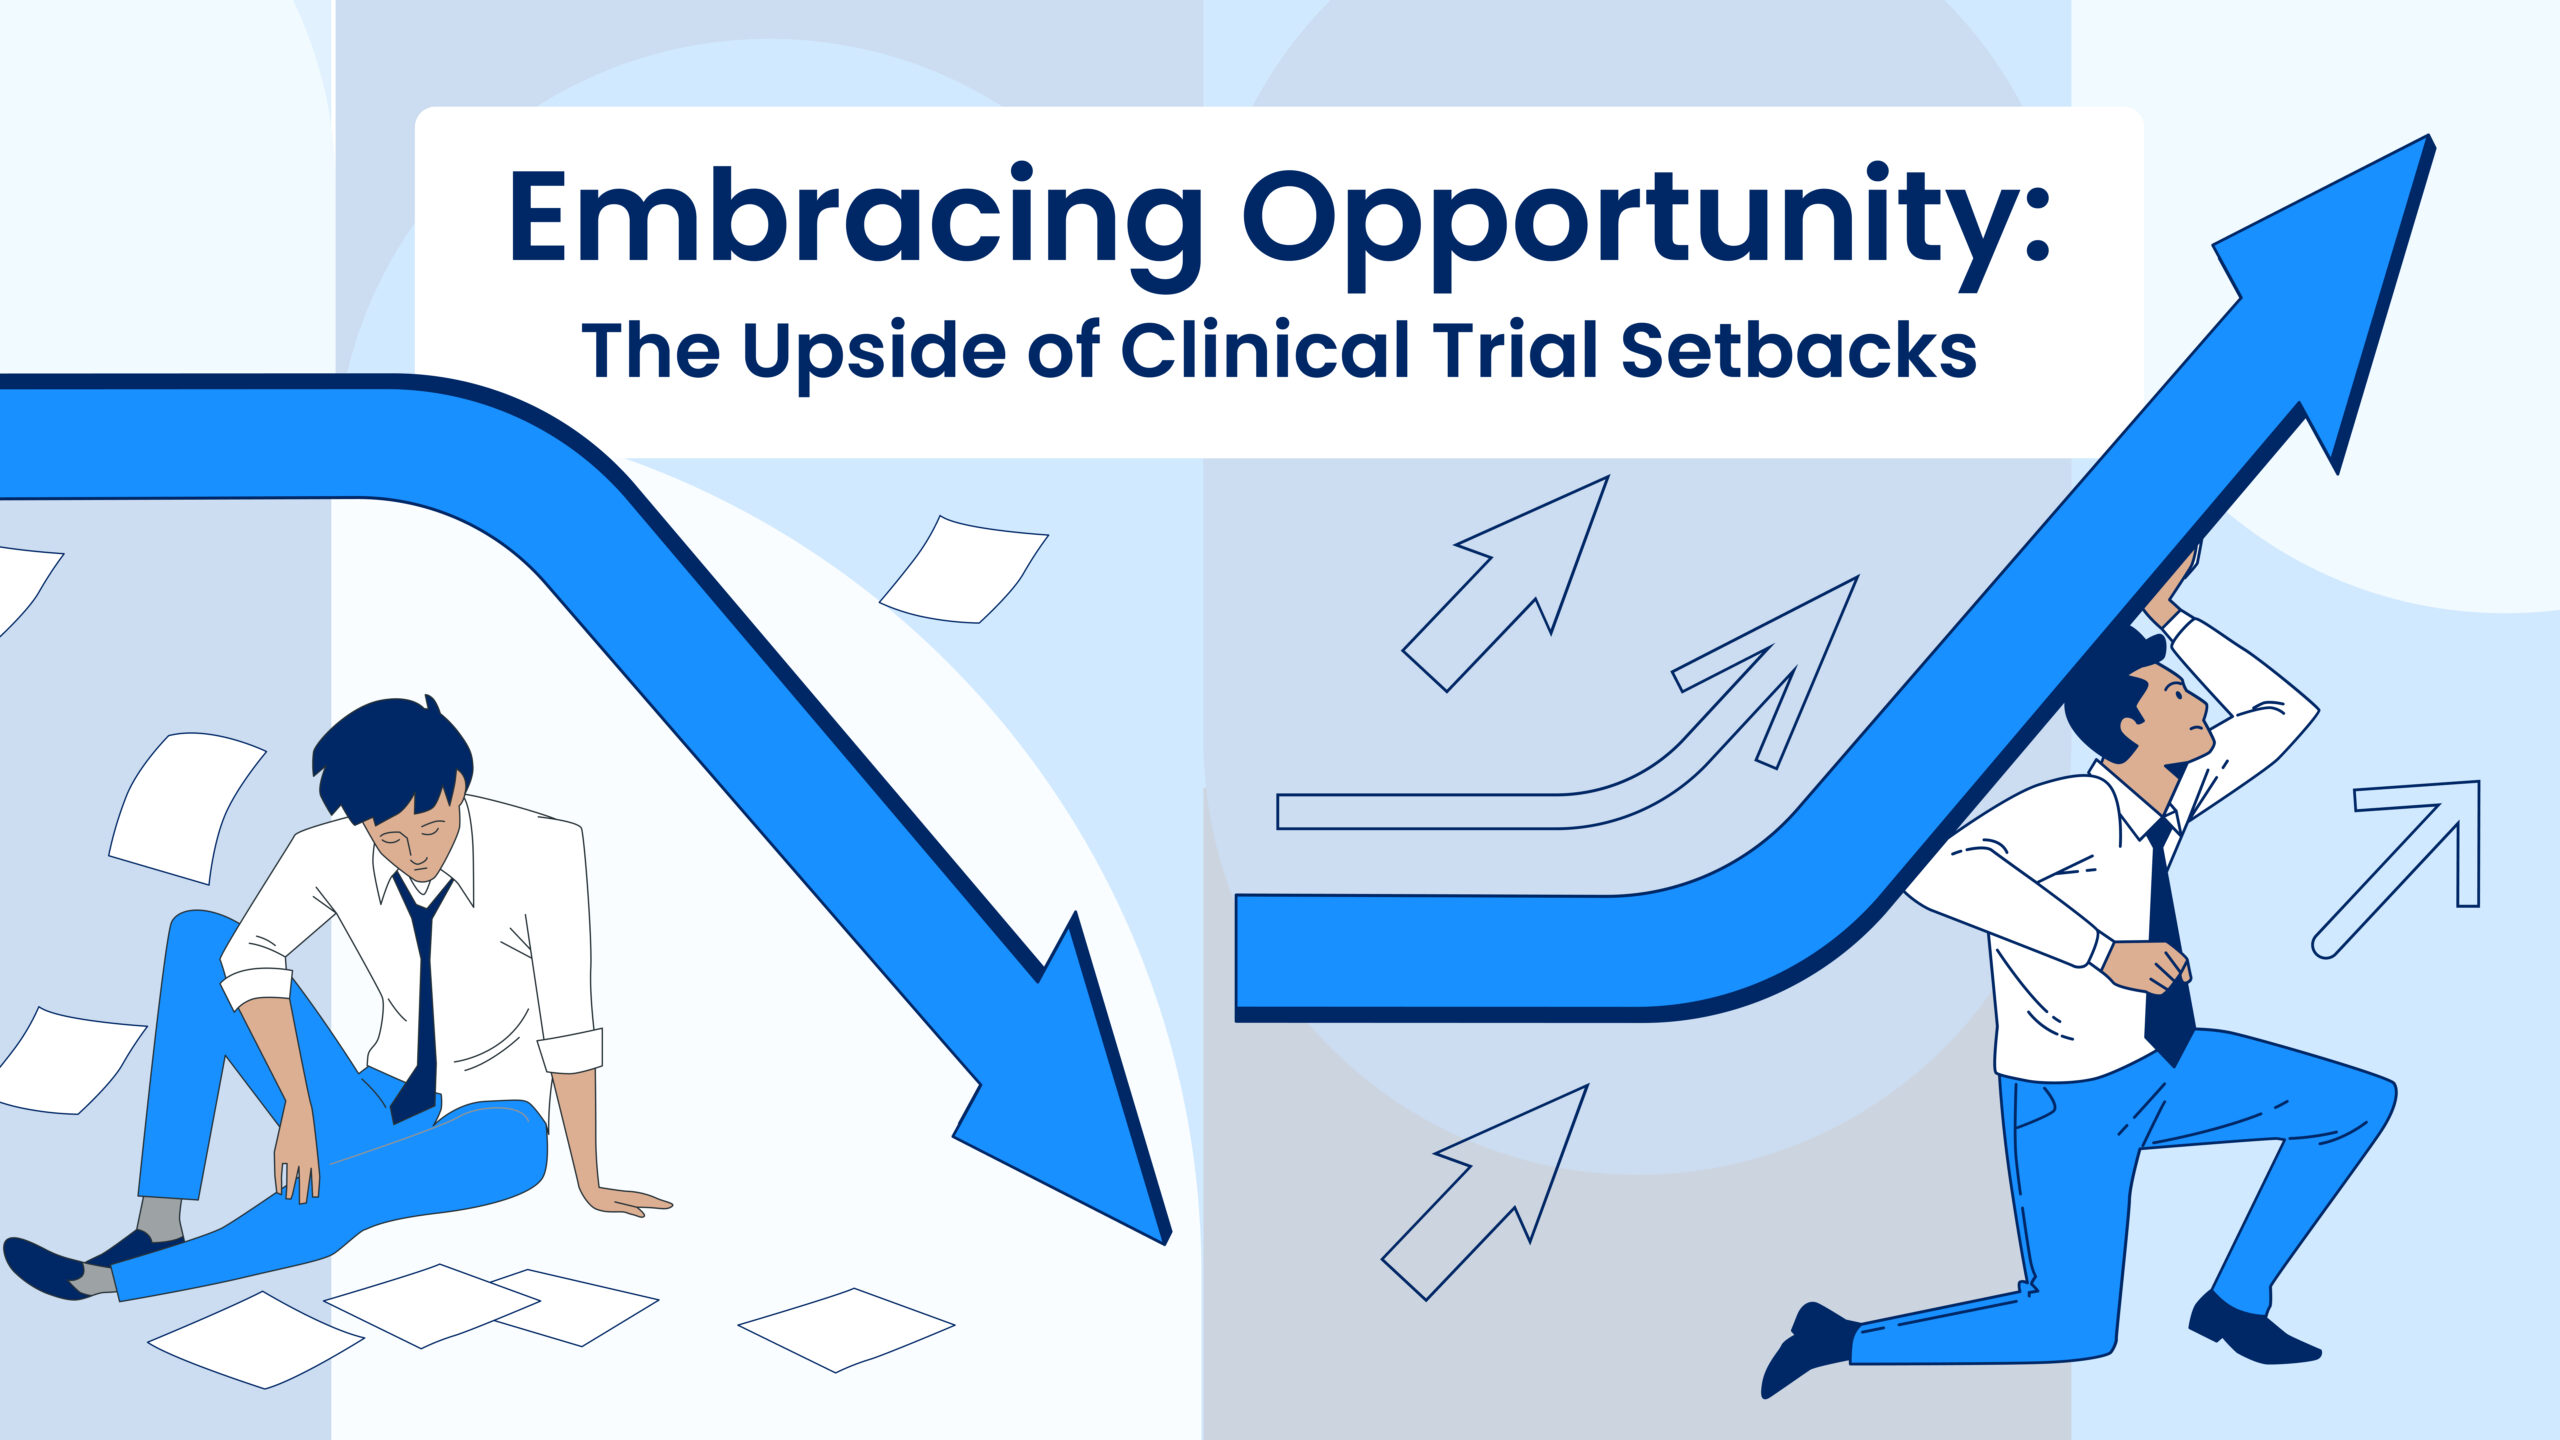 When clinical trials fail: there’s always a silver lining